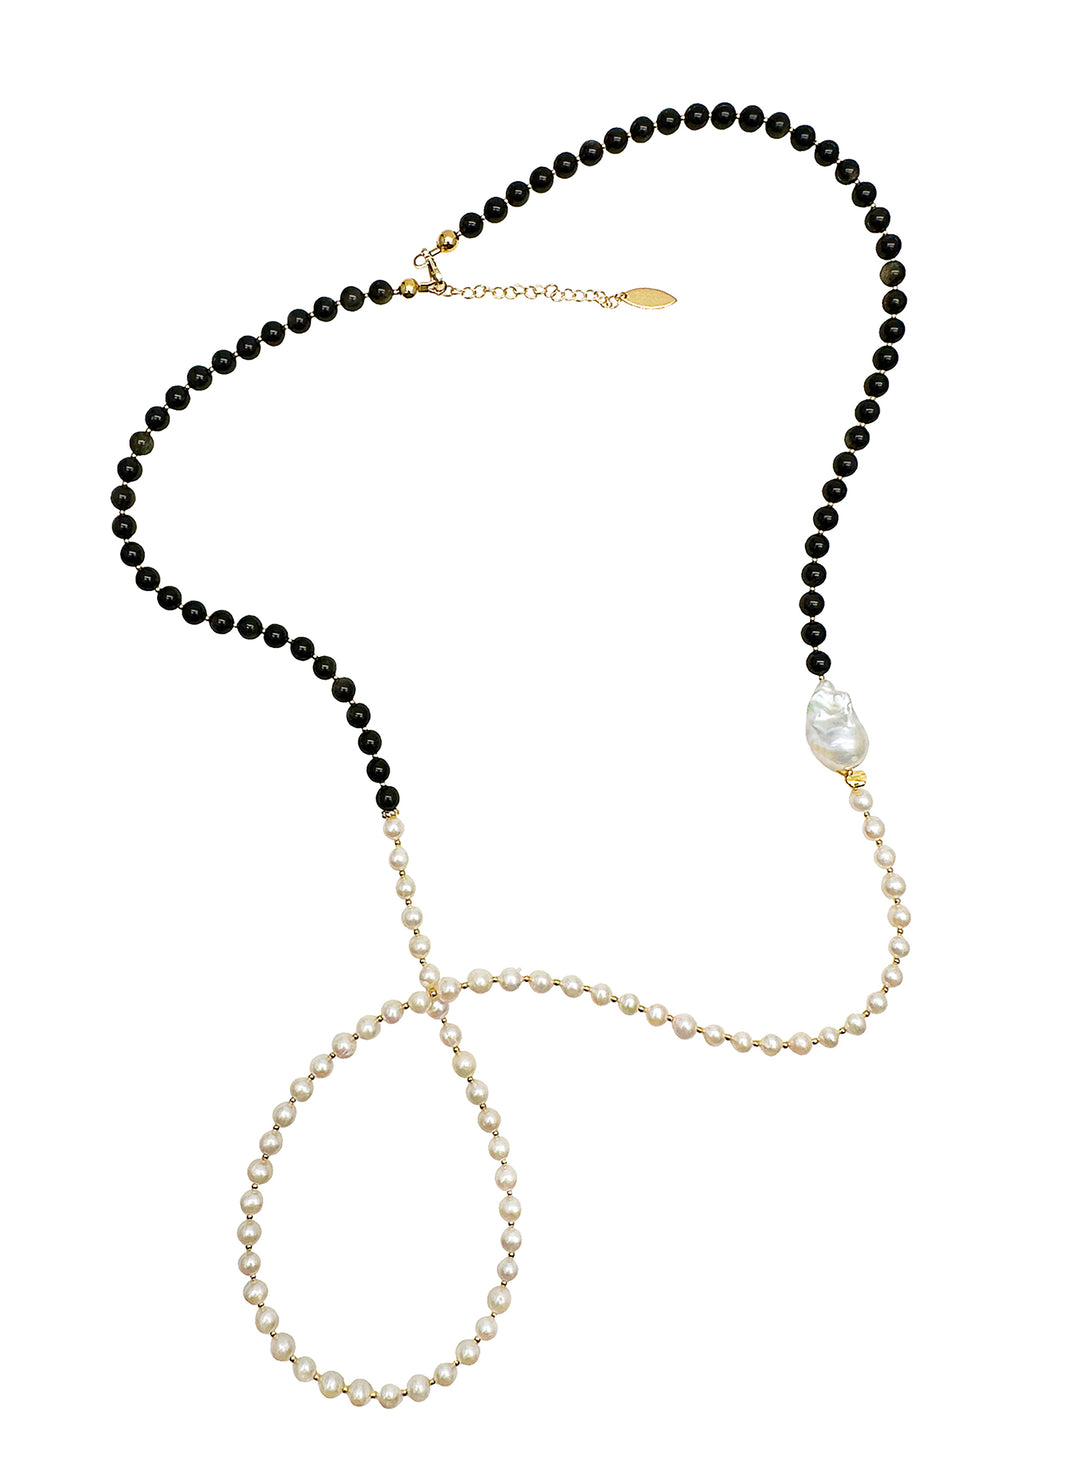 Black Obsidian and White Freshwater Pearls Long Necklace JN059 - FARRA